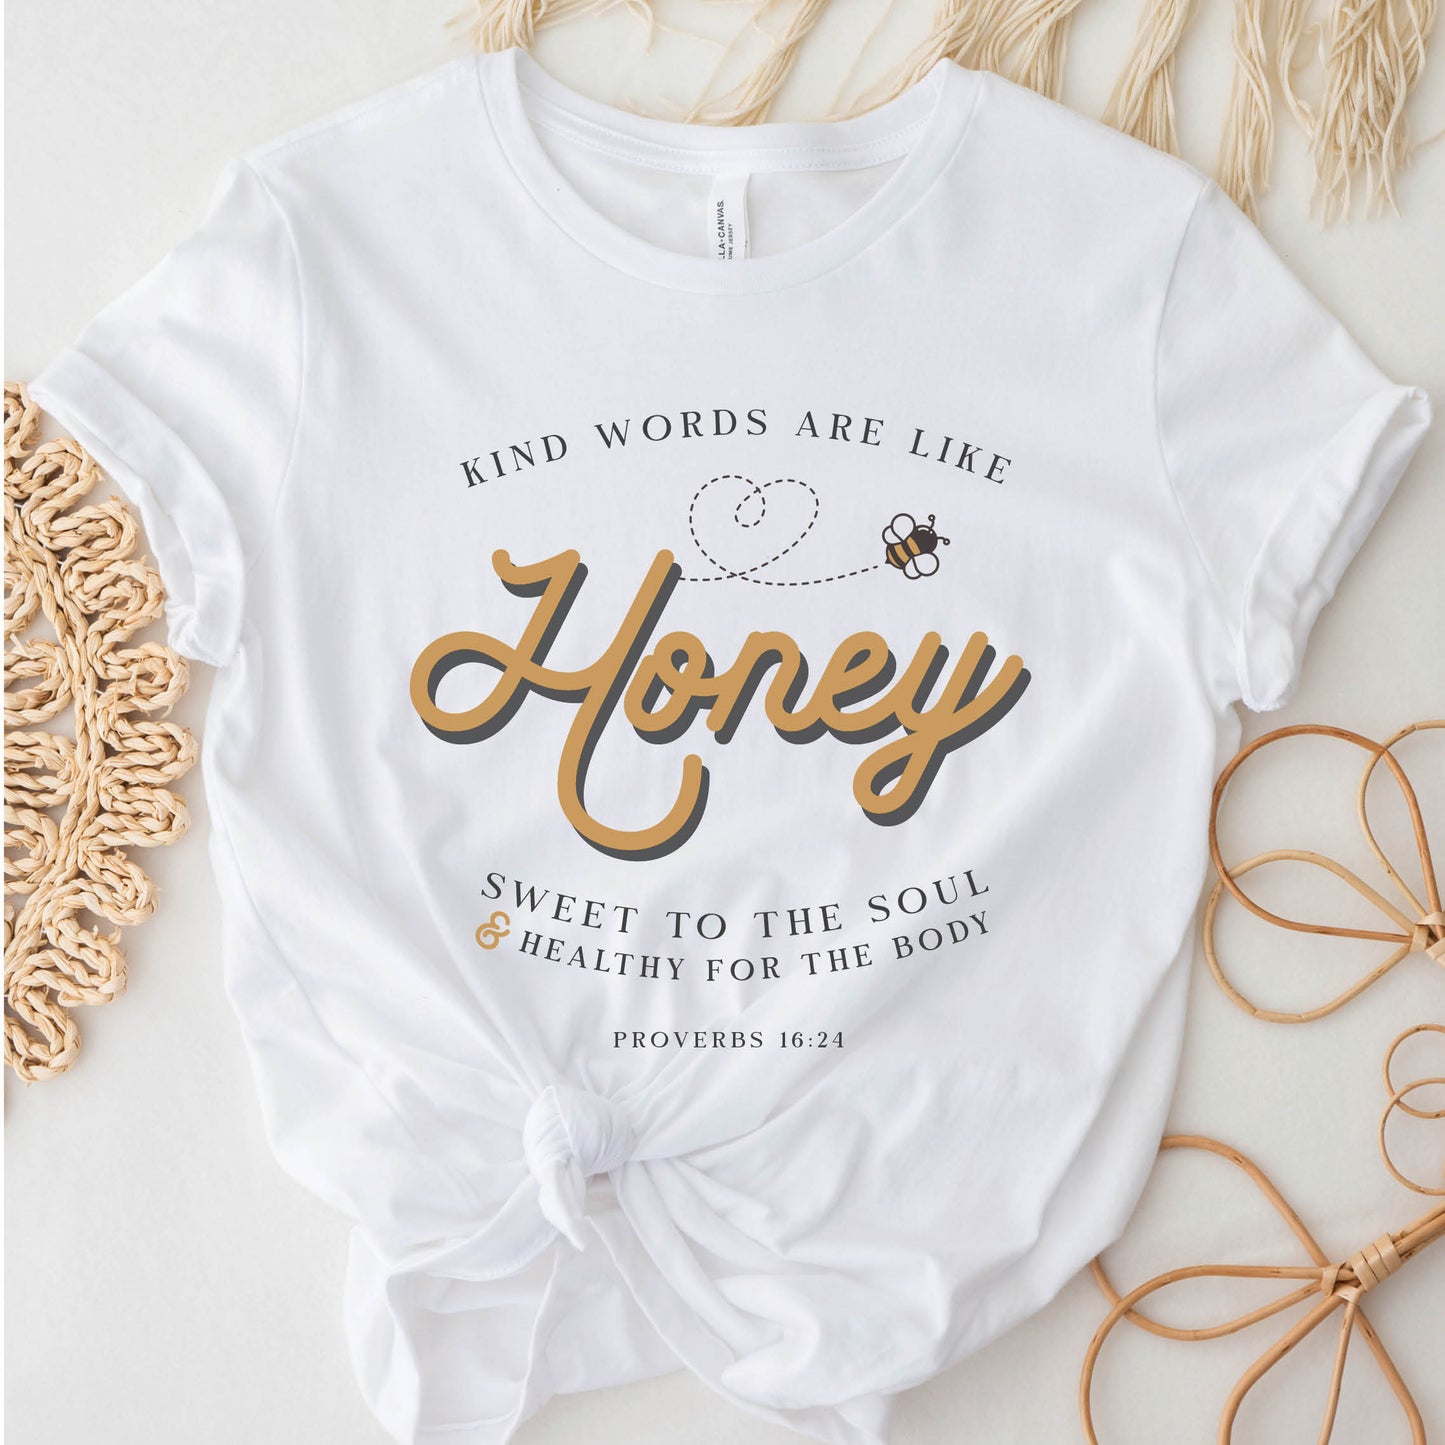 White and gold Christian aesthetic unisex faith-based kindness bee t-shirt for women with Proverbs 16:24 bible verse quote that says, "Kind Words Are Like Honey, Sweet To the Soul, and Healthy For the Body" 